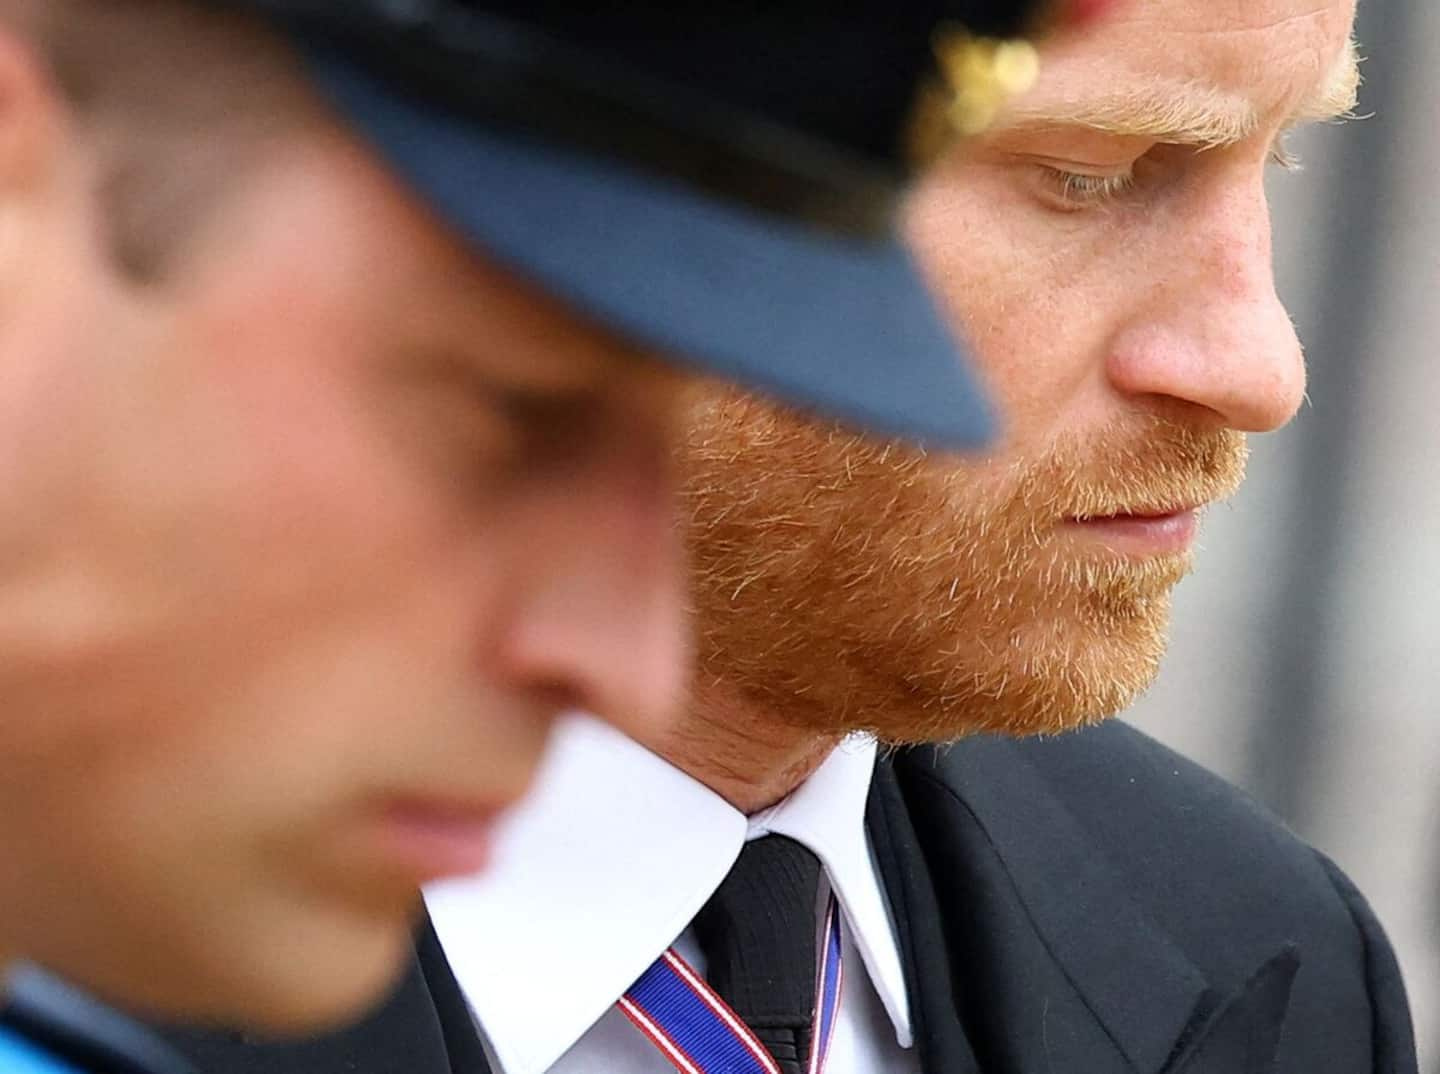 Prince Harry wants to reconcile with Prince William and King Charles III